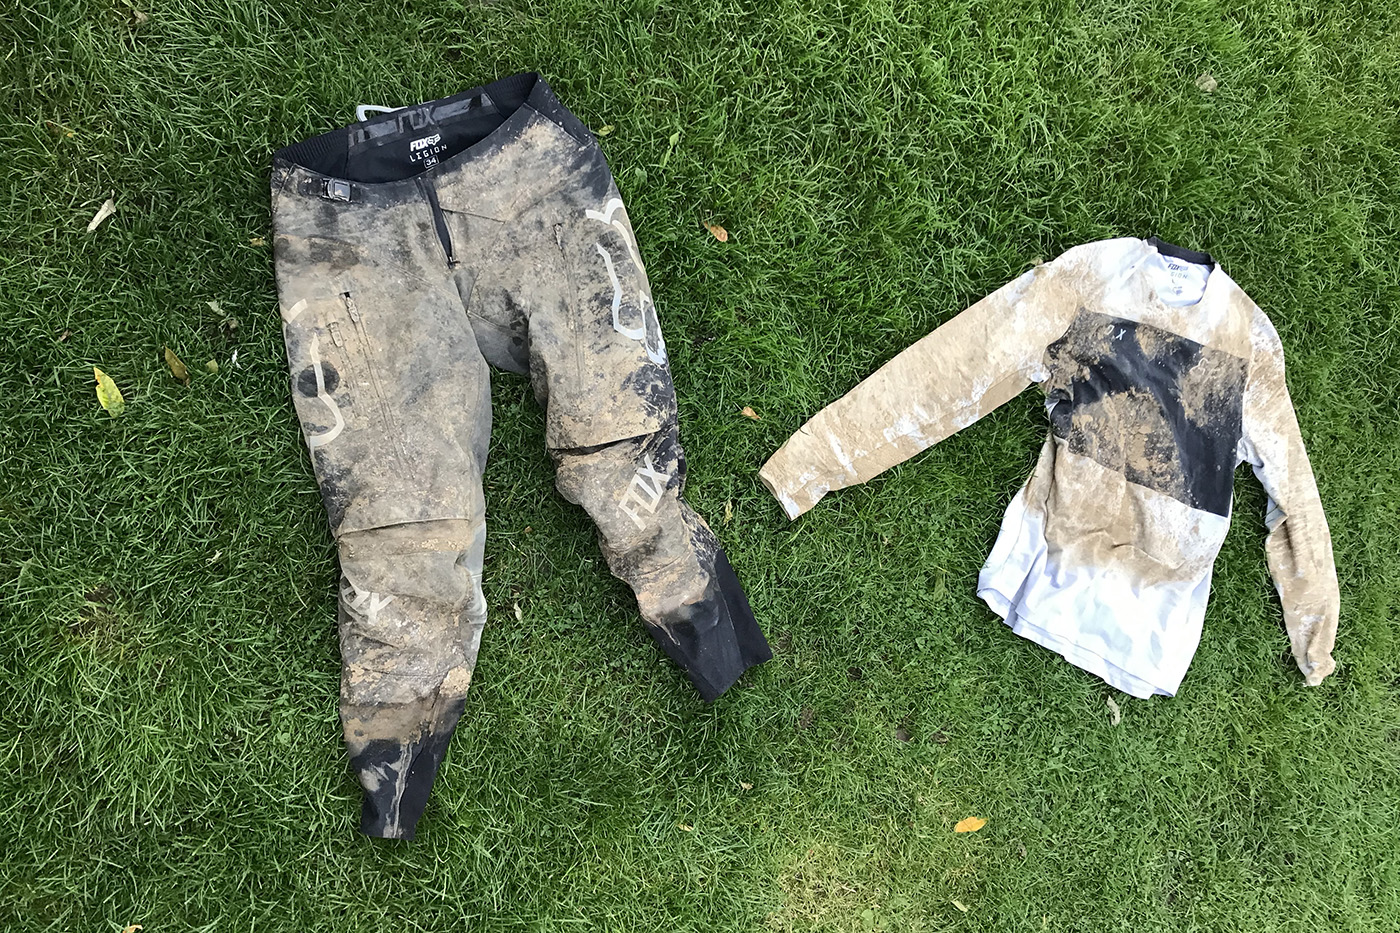 Tested: 2 years of hard graft for the FOX Legion off-road riding pants and jersey